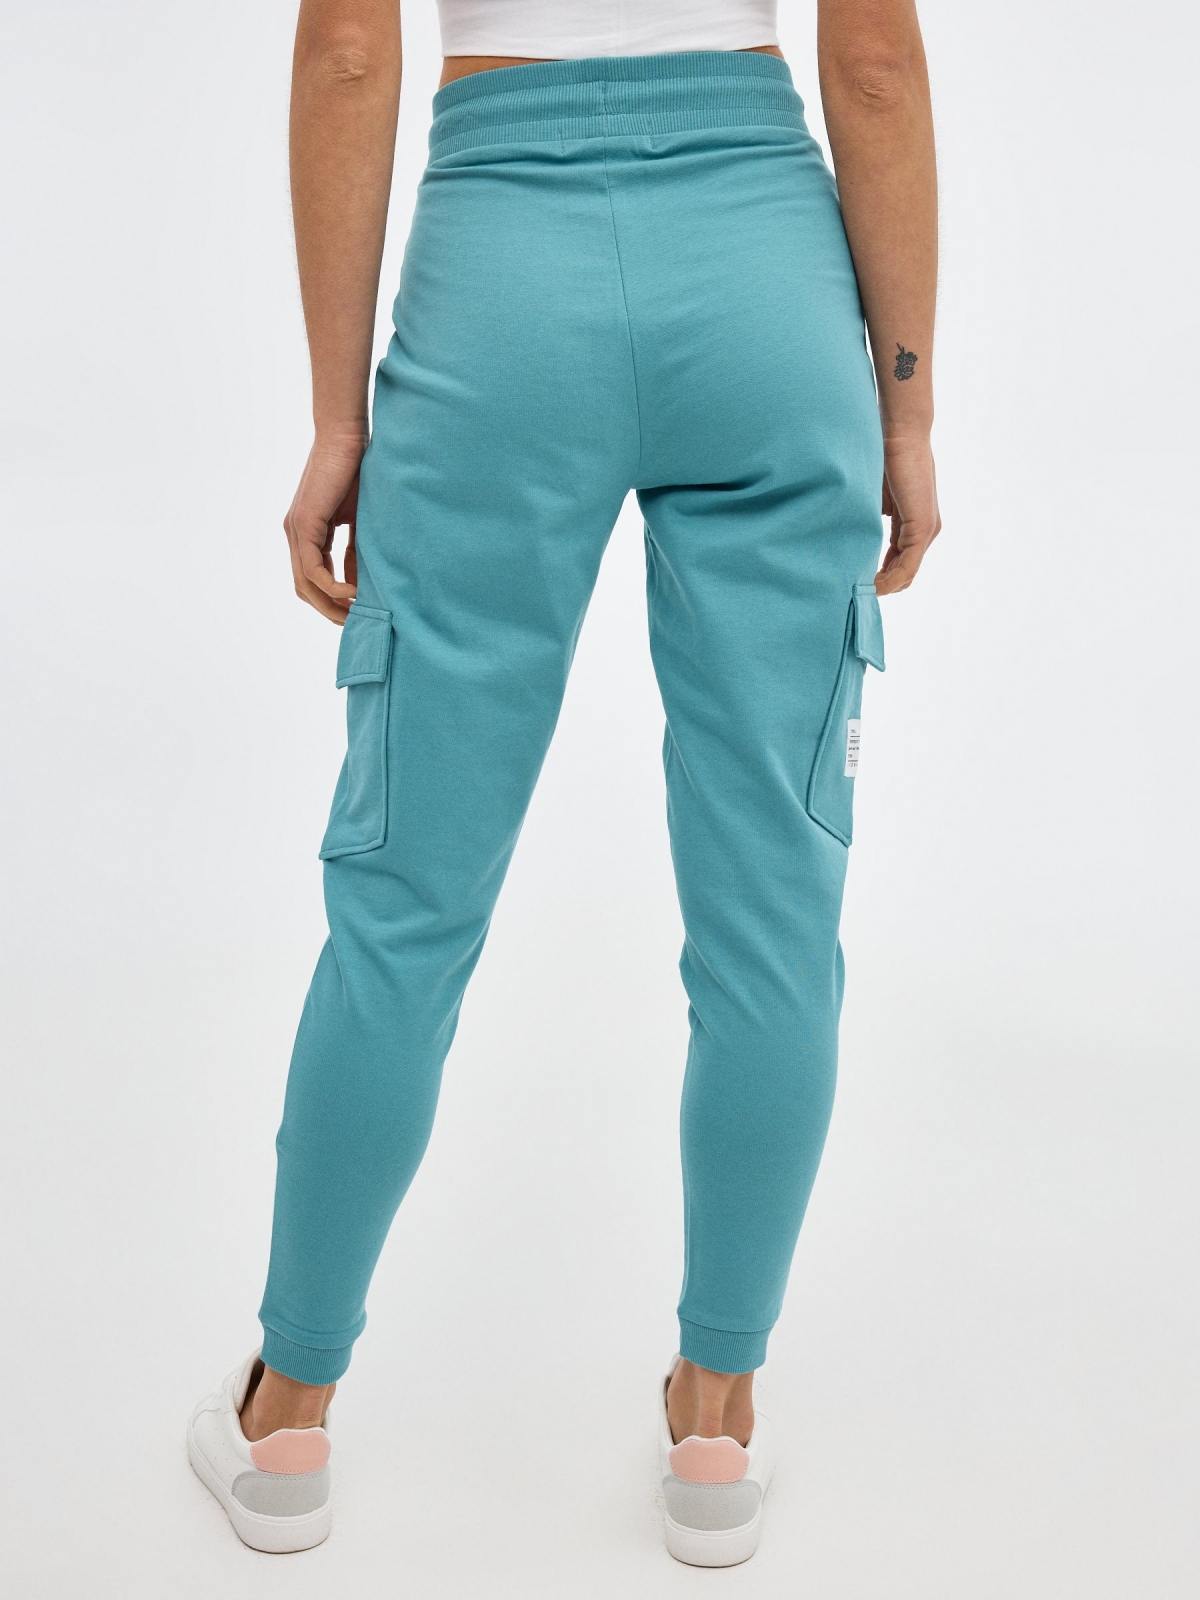 Plush jogger pants teal middle back view